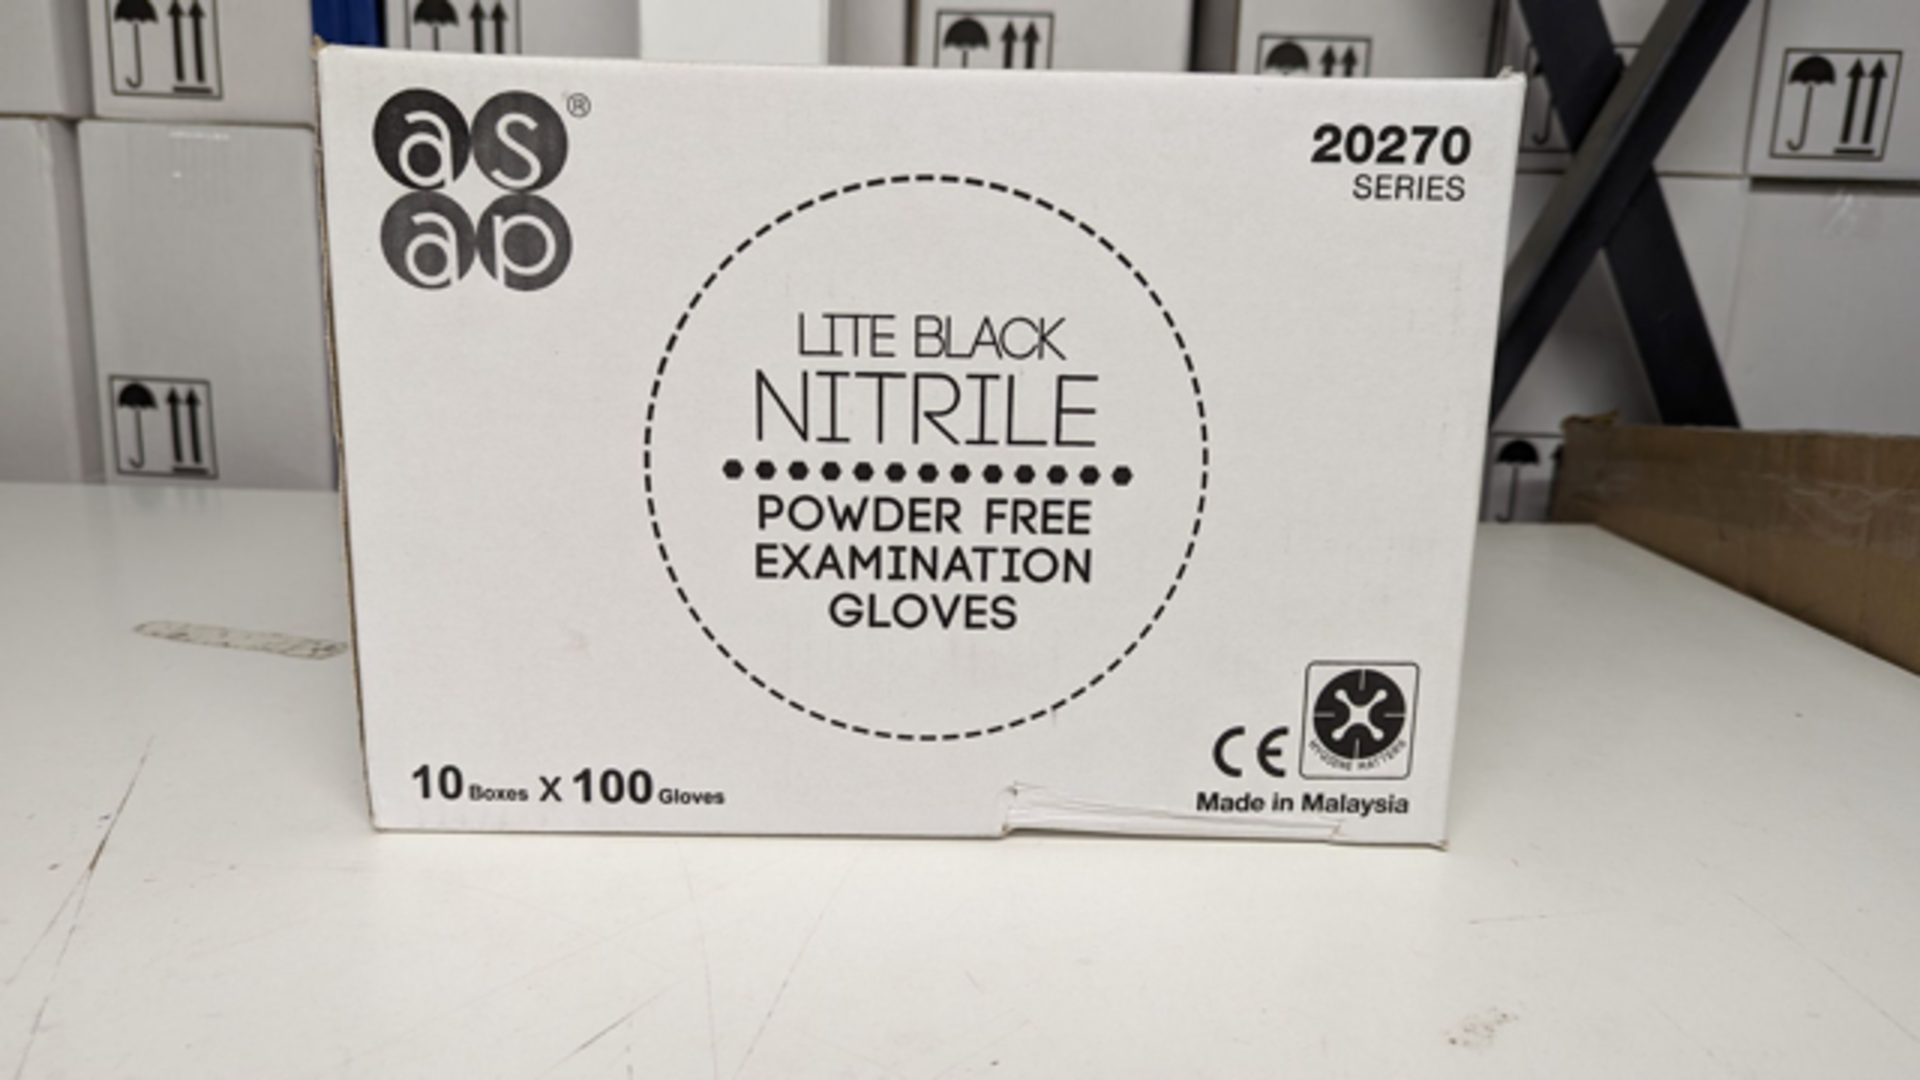 840 X BRAND NEW PACKS OF 100 ASAP LITE BLACK NITRILE POWDER FREE EXAMINATION GLOVES SIZE SMALL EXP - Image 3 of 3